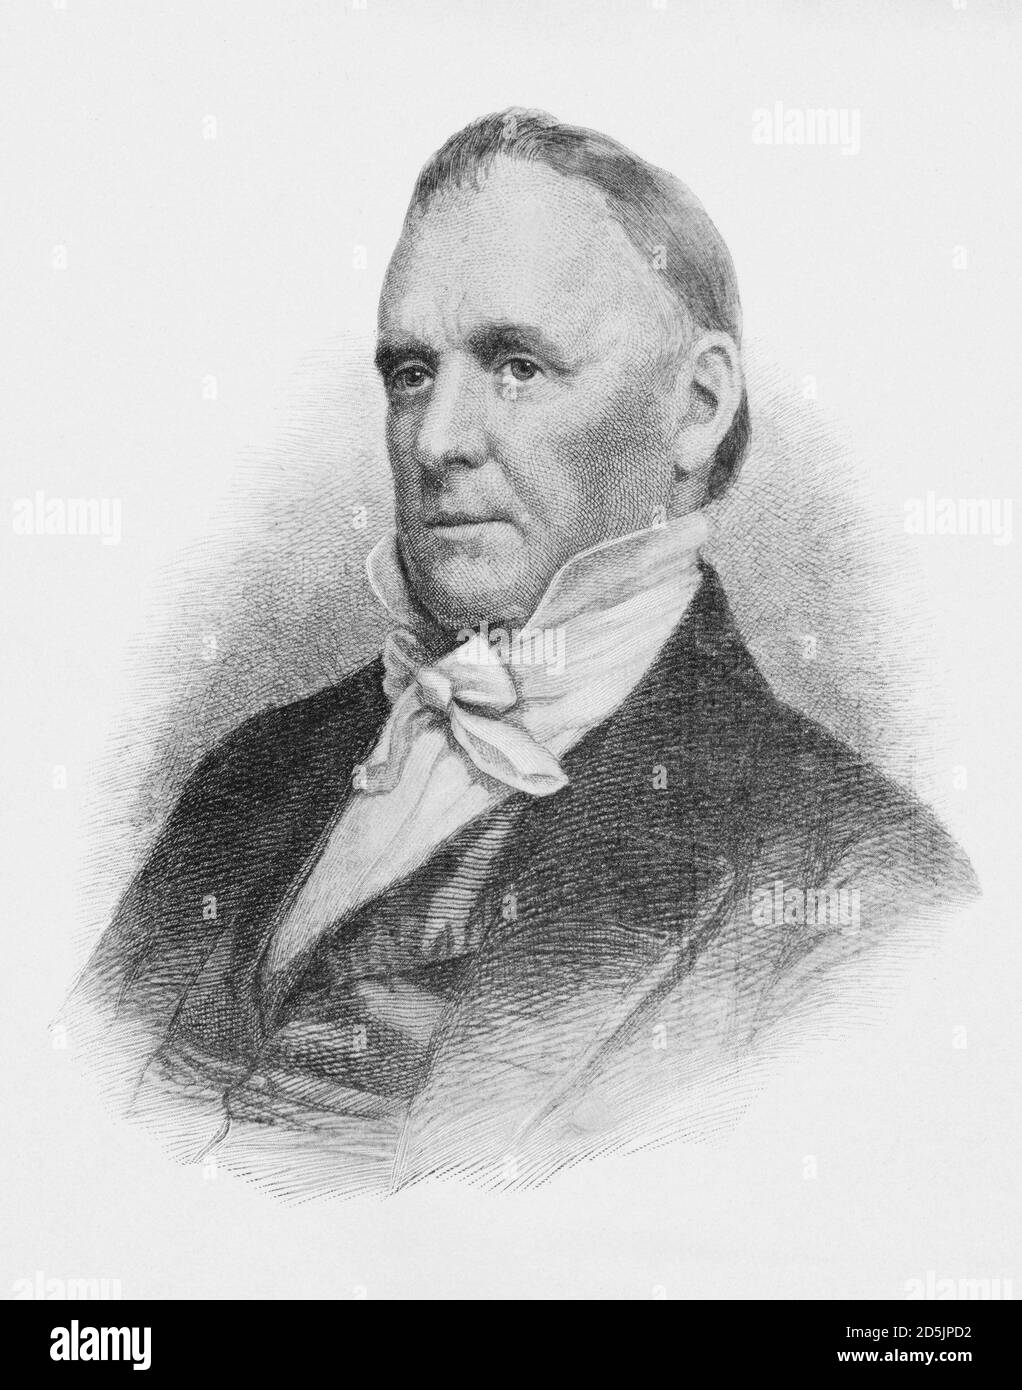 Portrait of president James Buchanan Jr. James Buchanan Jr. (1791 – 1868) was an American lawyer and politician who served as the 15th president of th Stock Photo